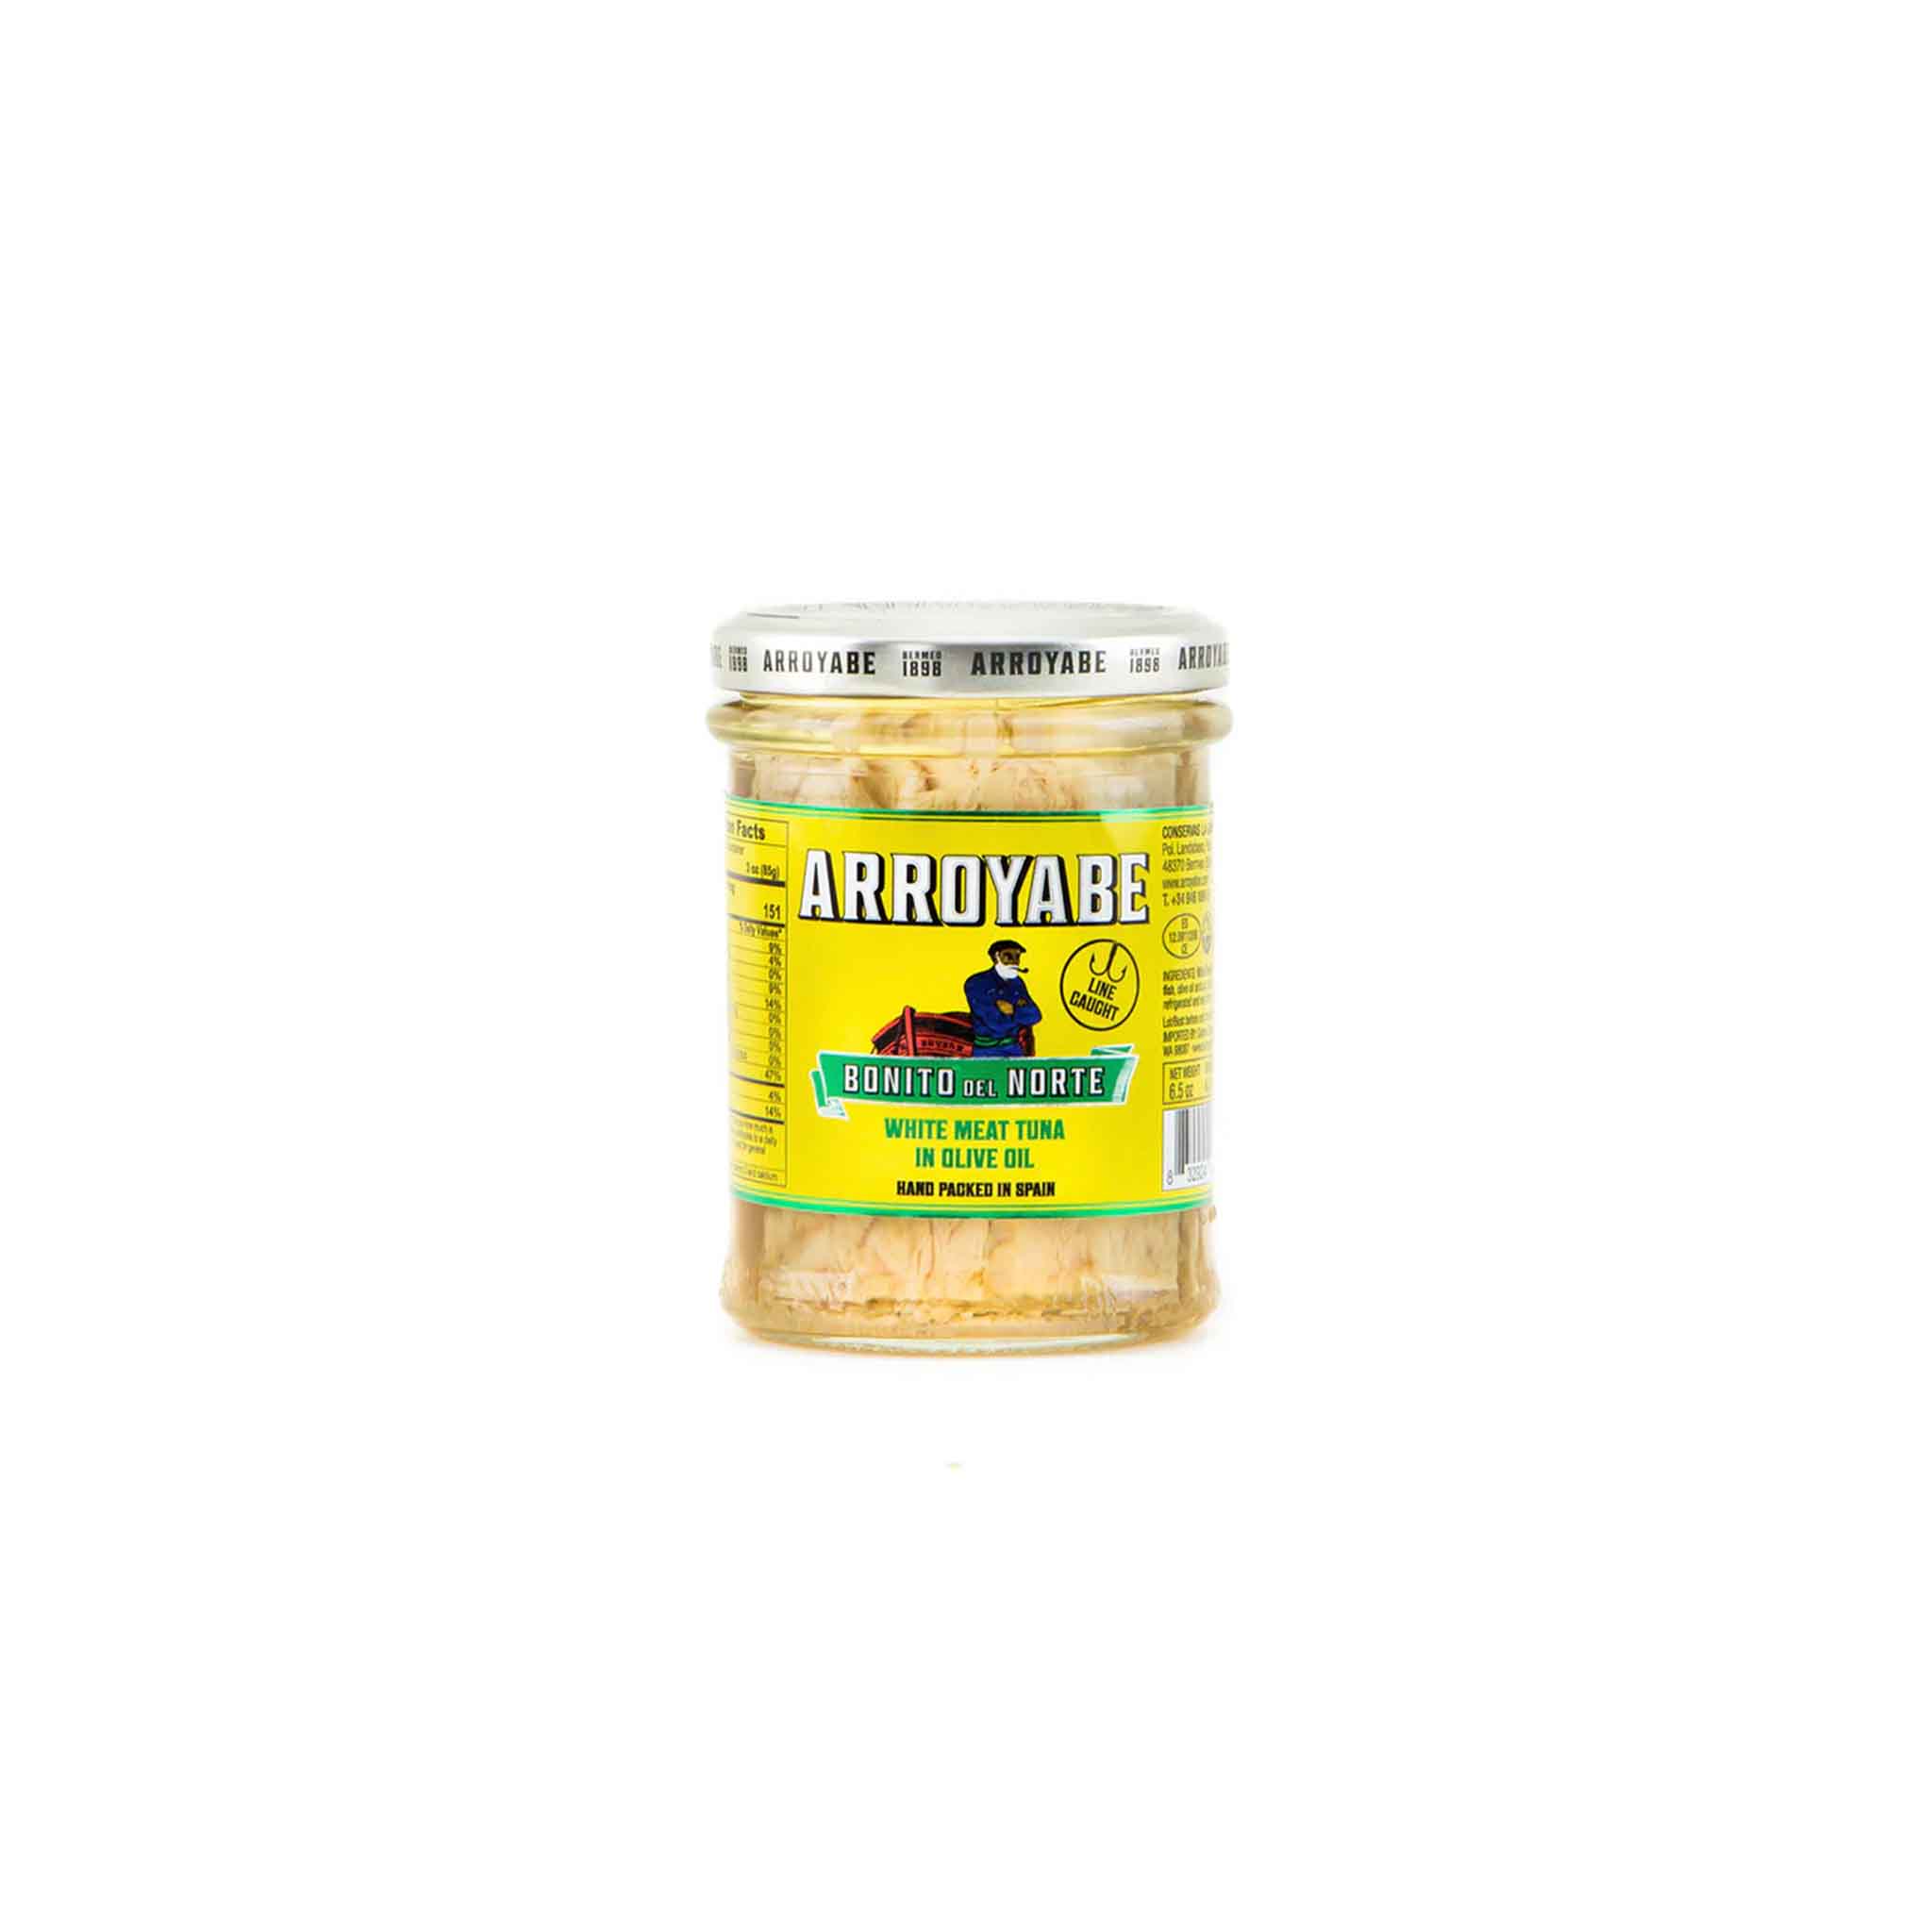 ARROYABE WHITE MEAT TUNA IN OLIVE OIL 6.5oz